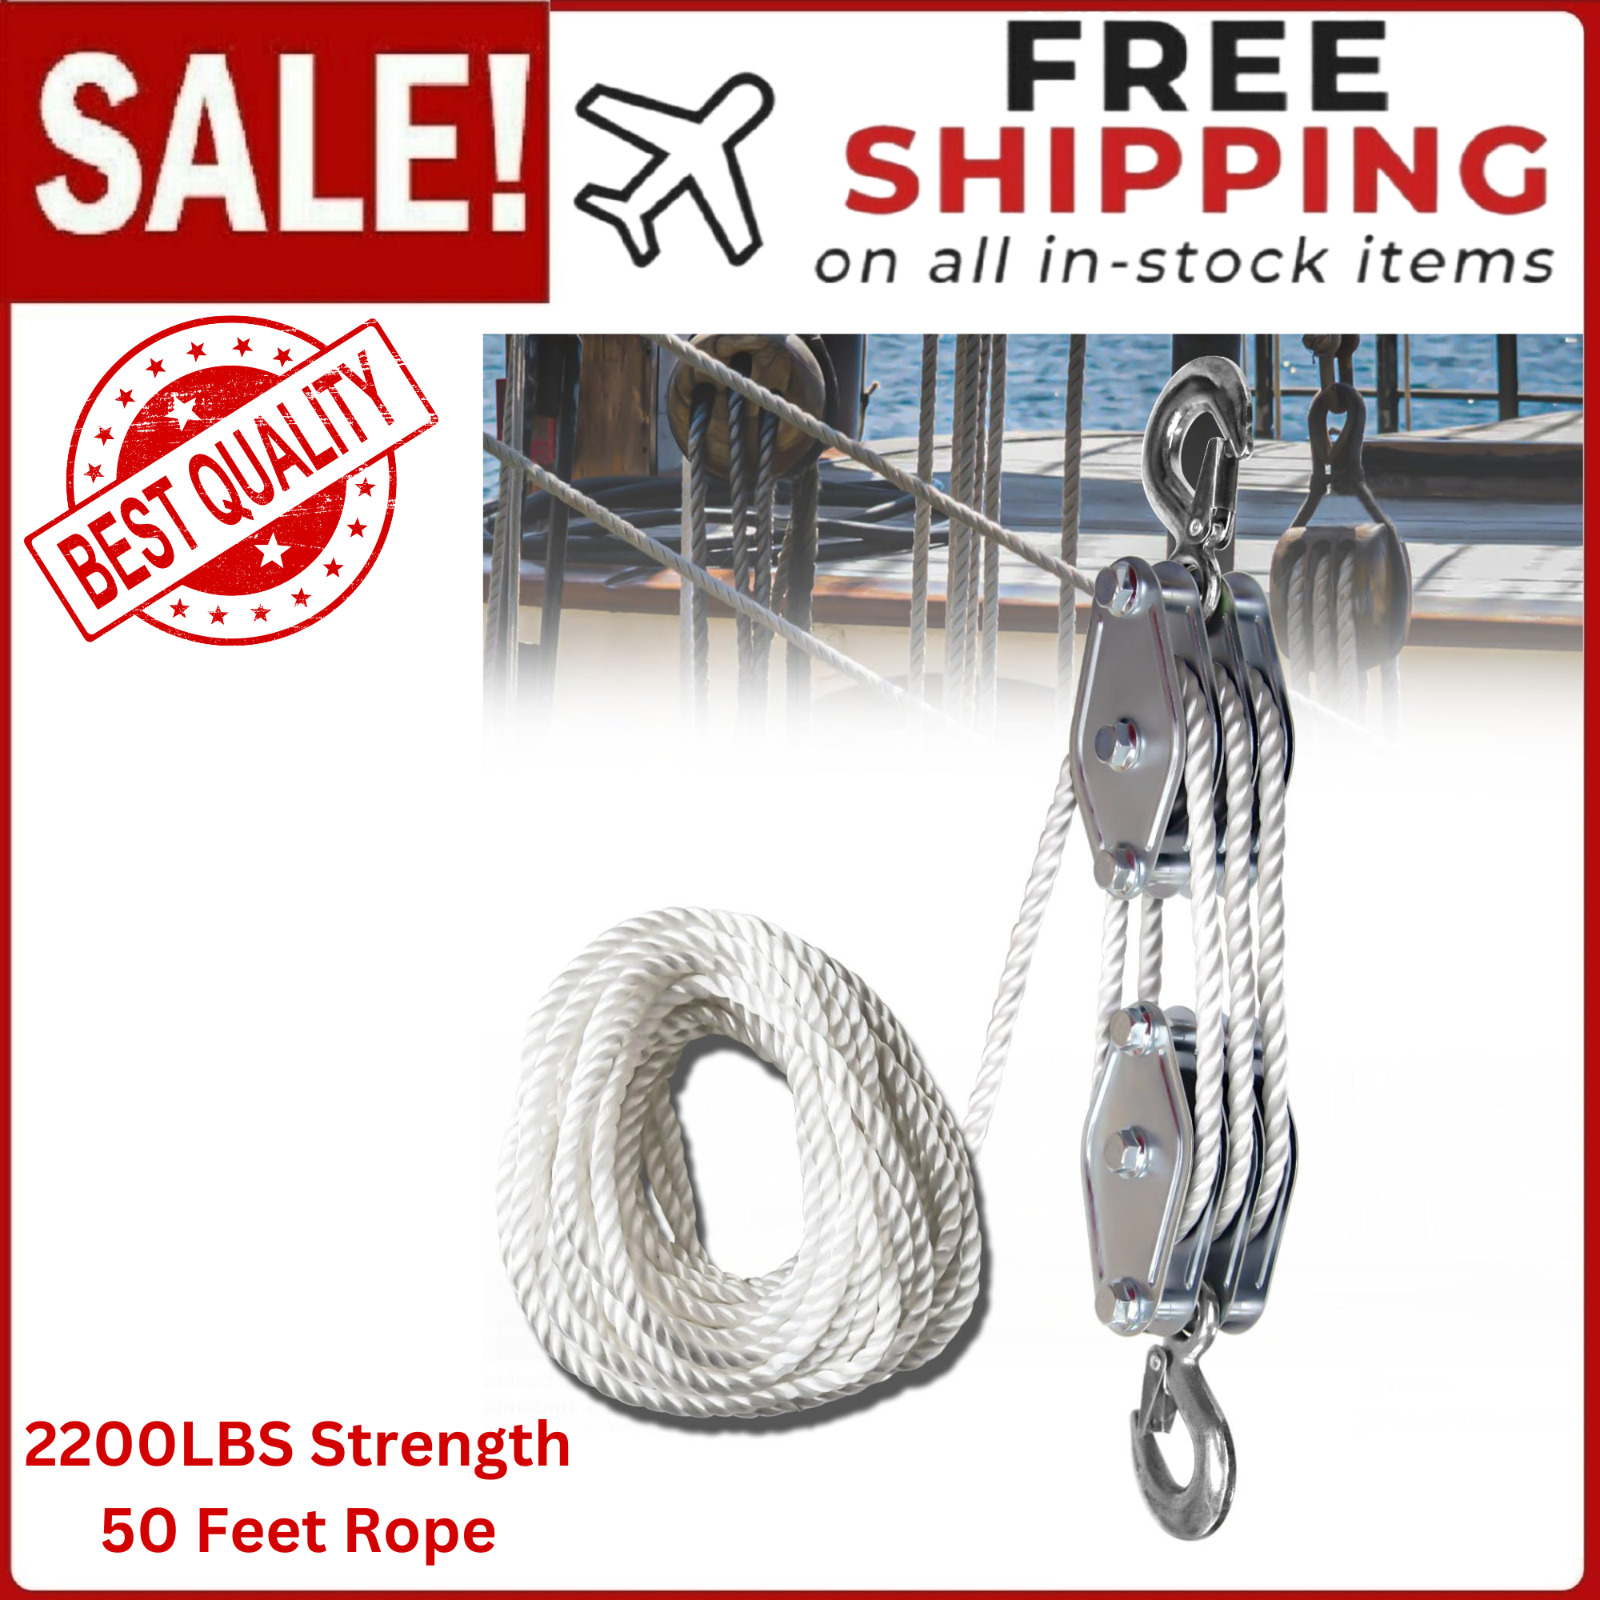 Block and Tackle 1100 Lbs 2200 LBS Breaking Strength Heavy Duty Pulley 50Ft Rope